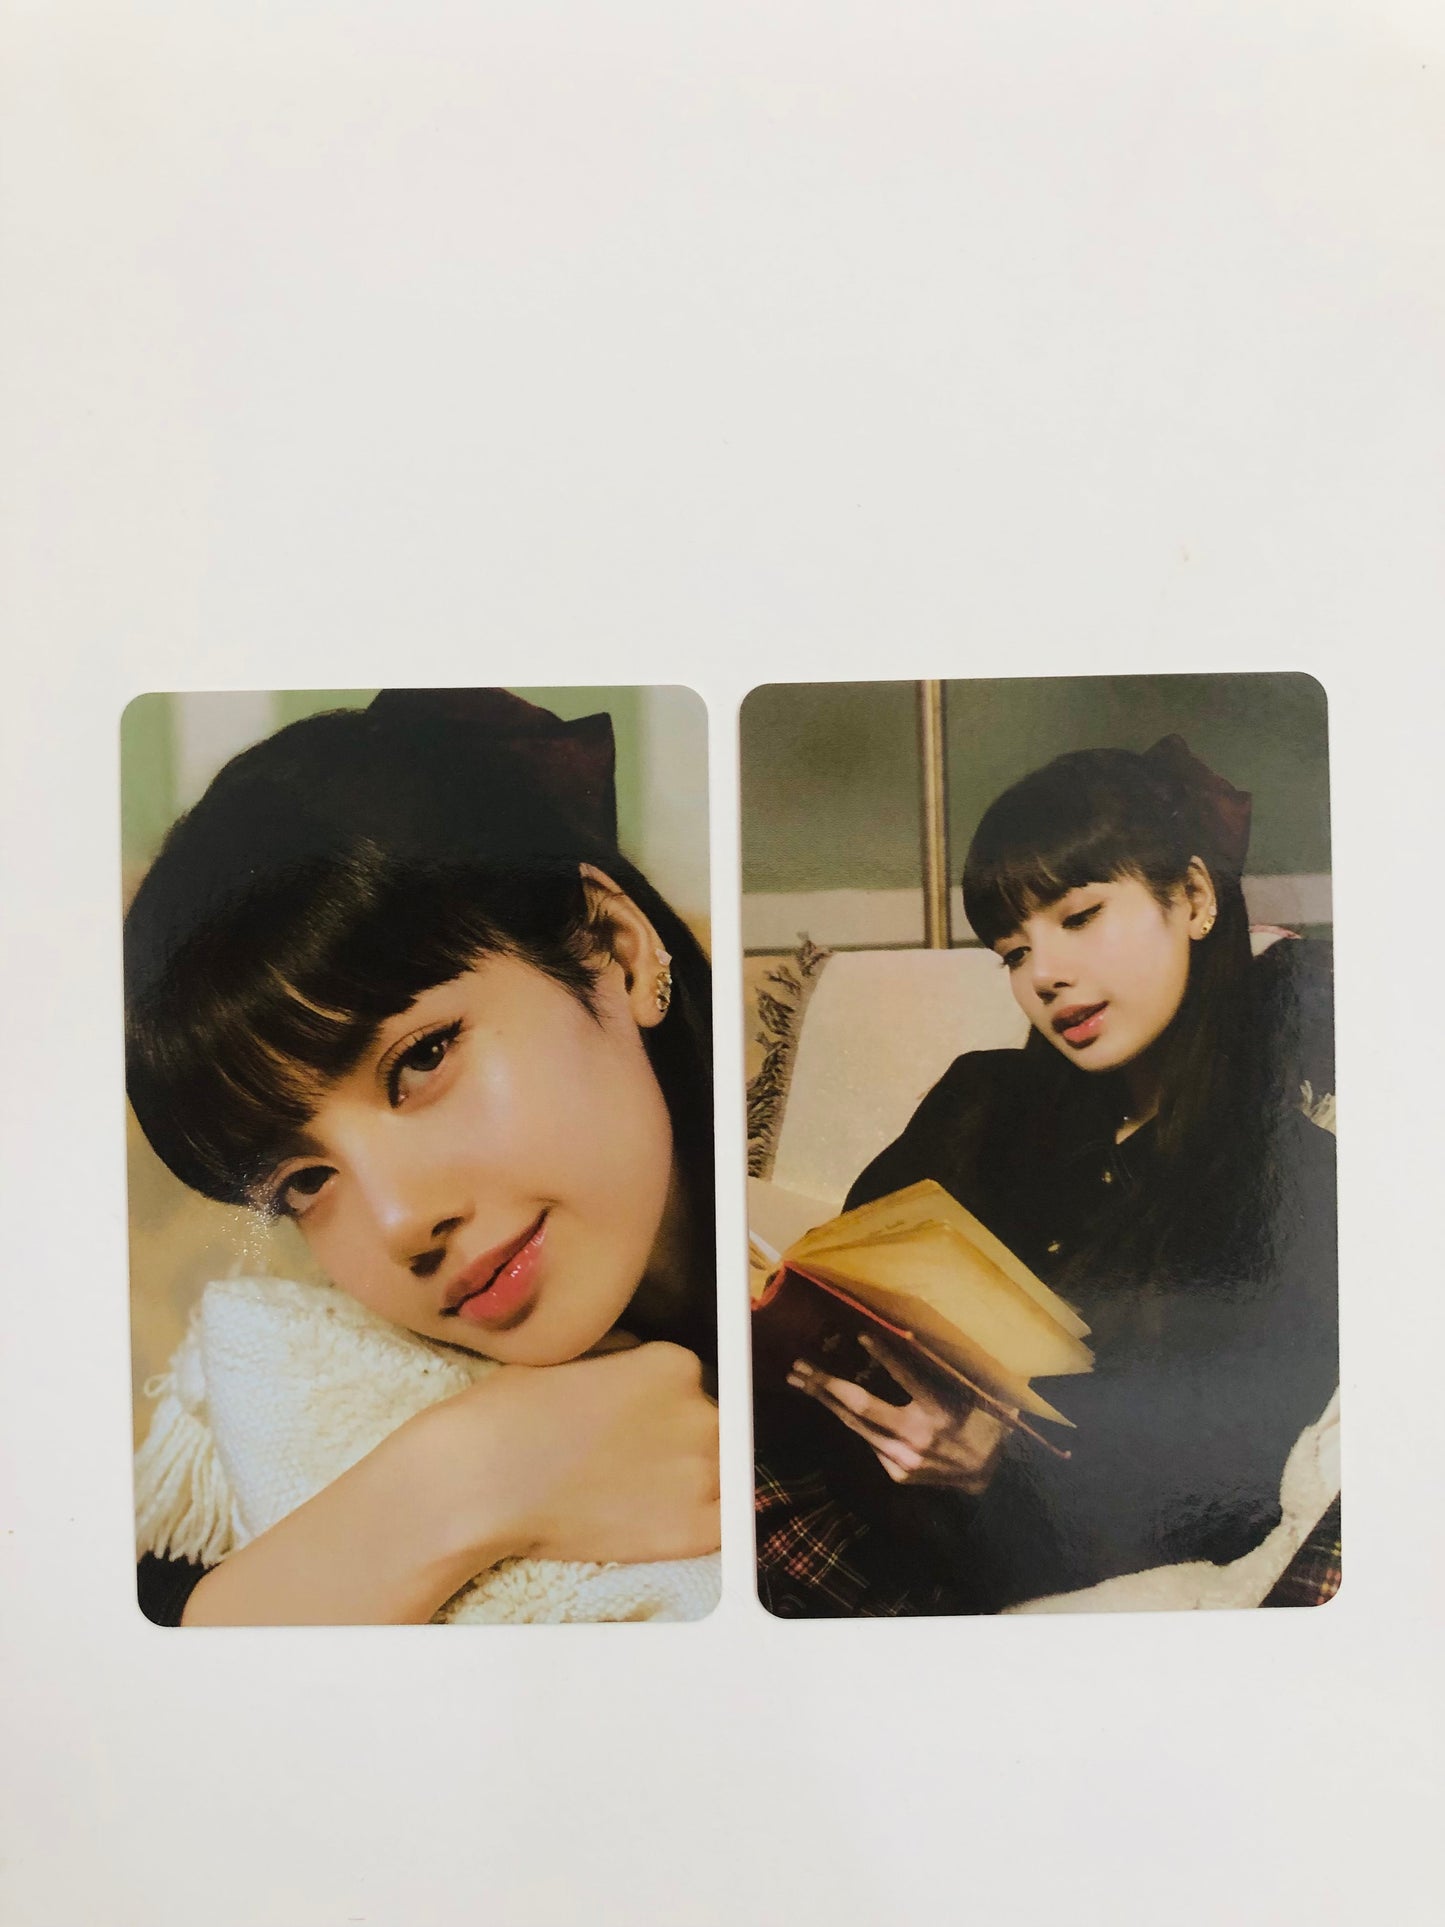 BLACKPINK THE GAME PHOTOCARD COLLECTION CHRISTMAS EDITION OFFICIAL